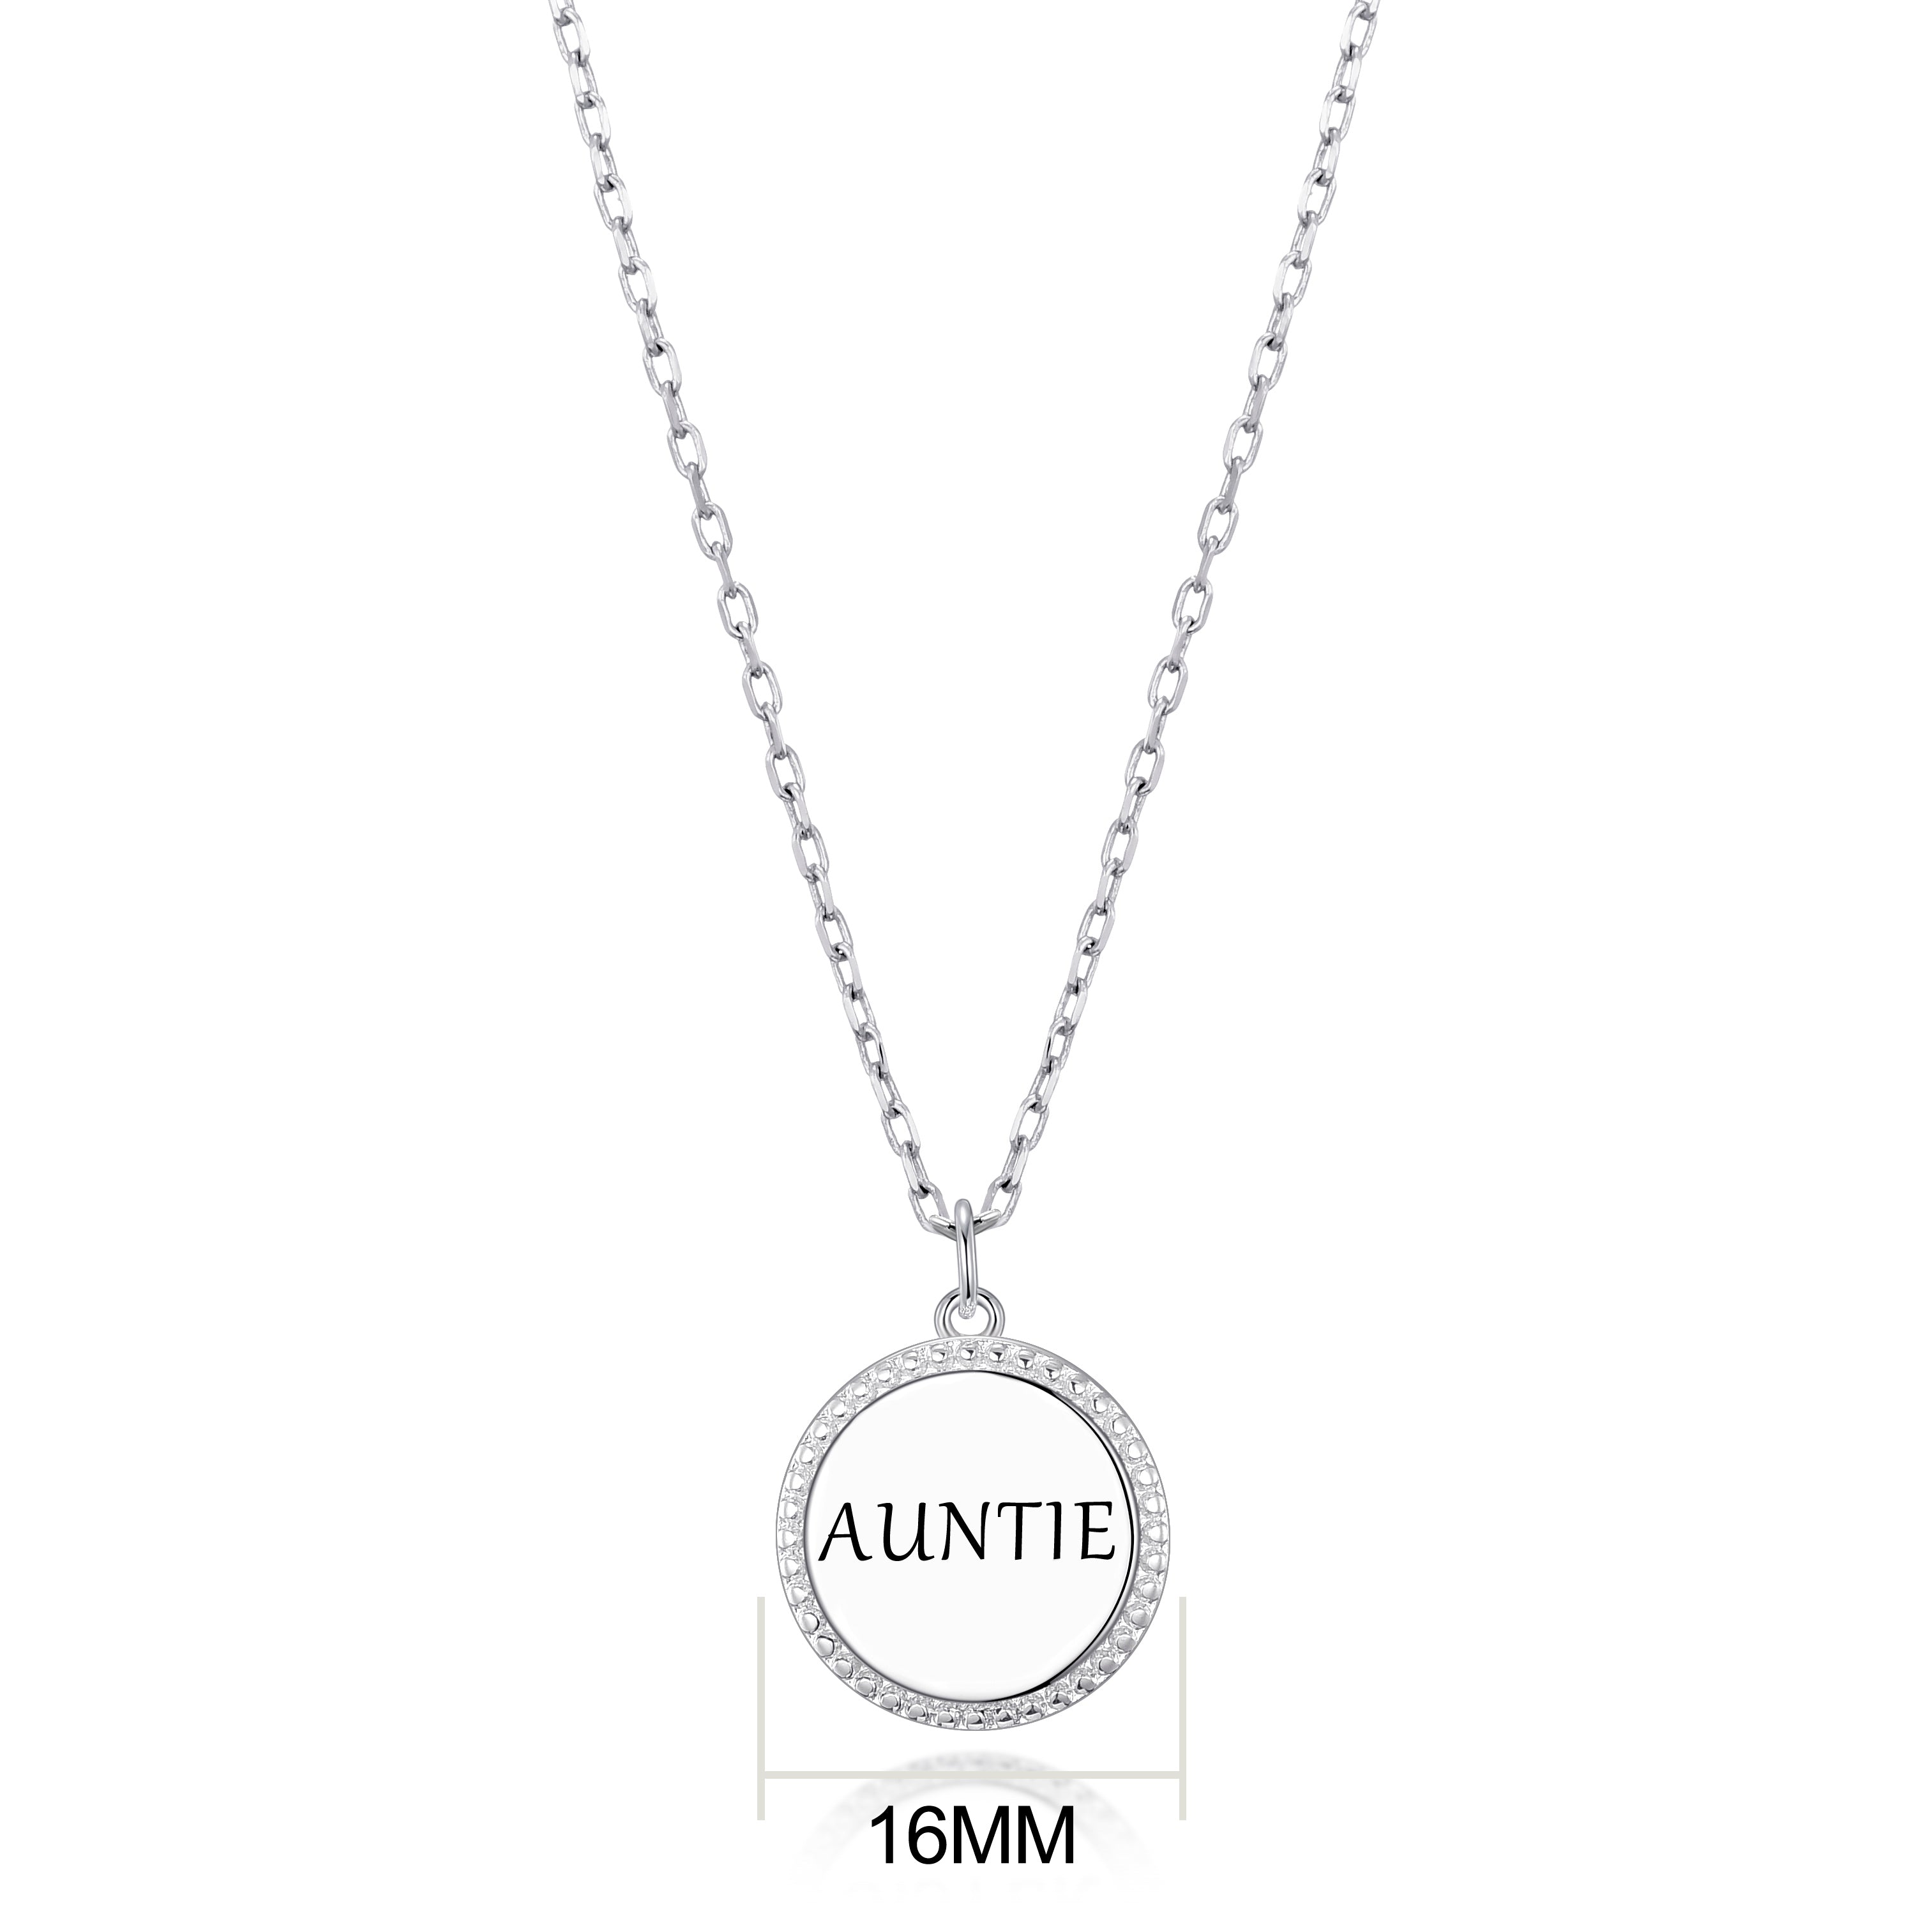 Silver Plated Filigree Disc Auntie Necklace